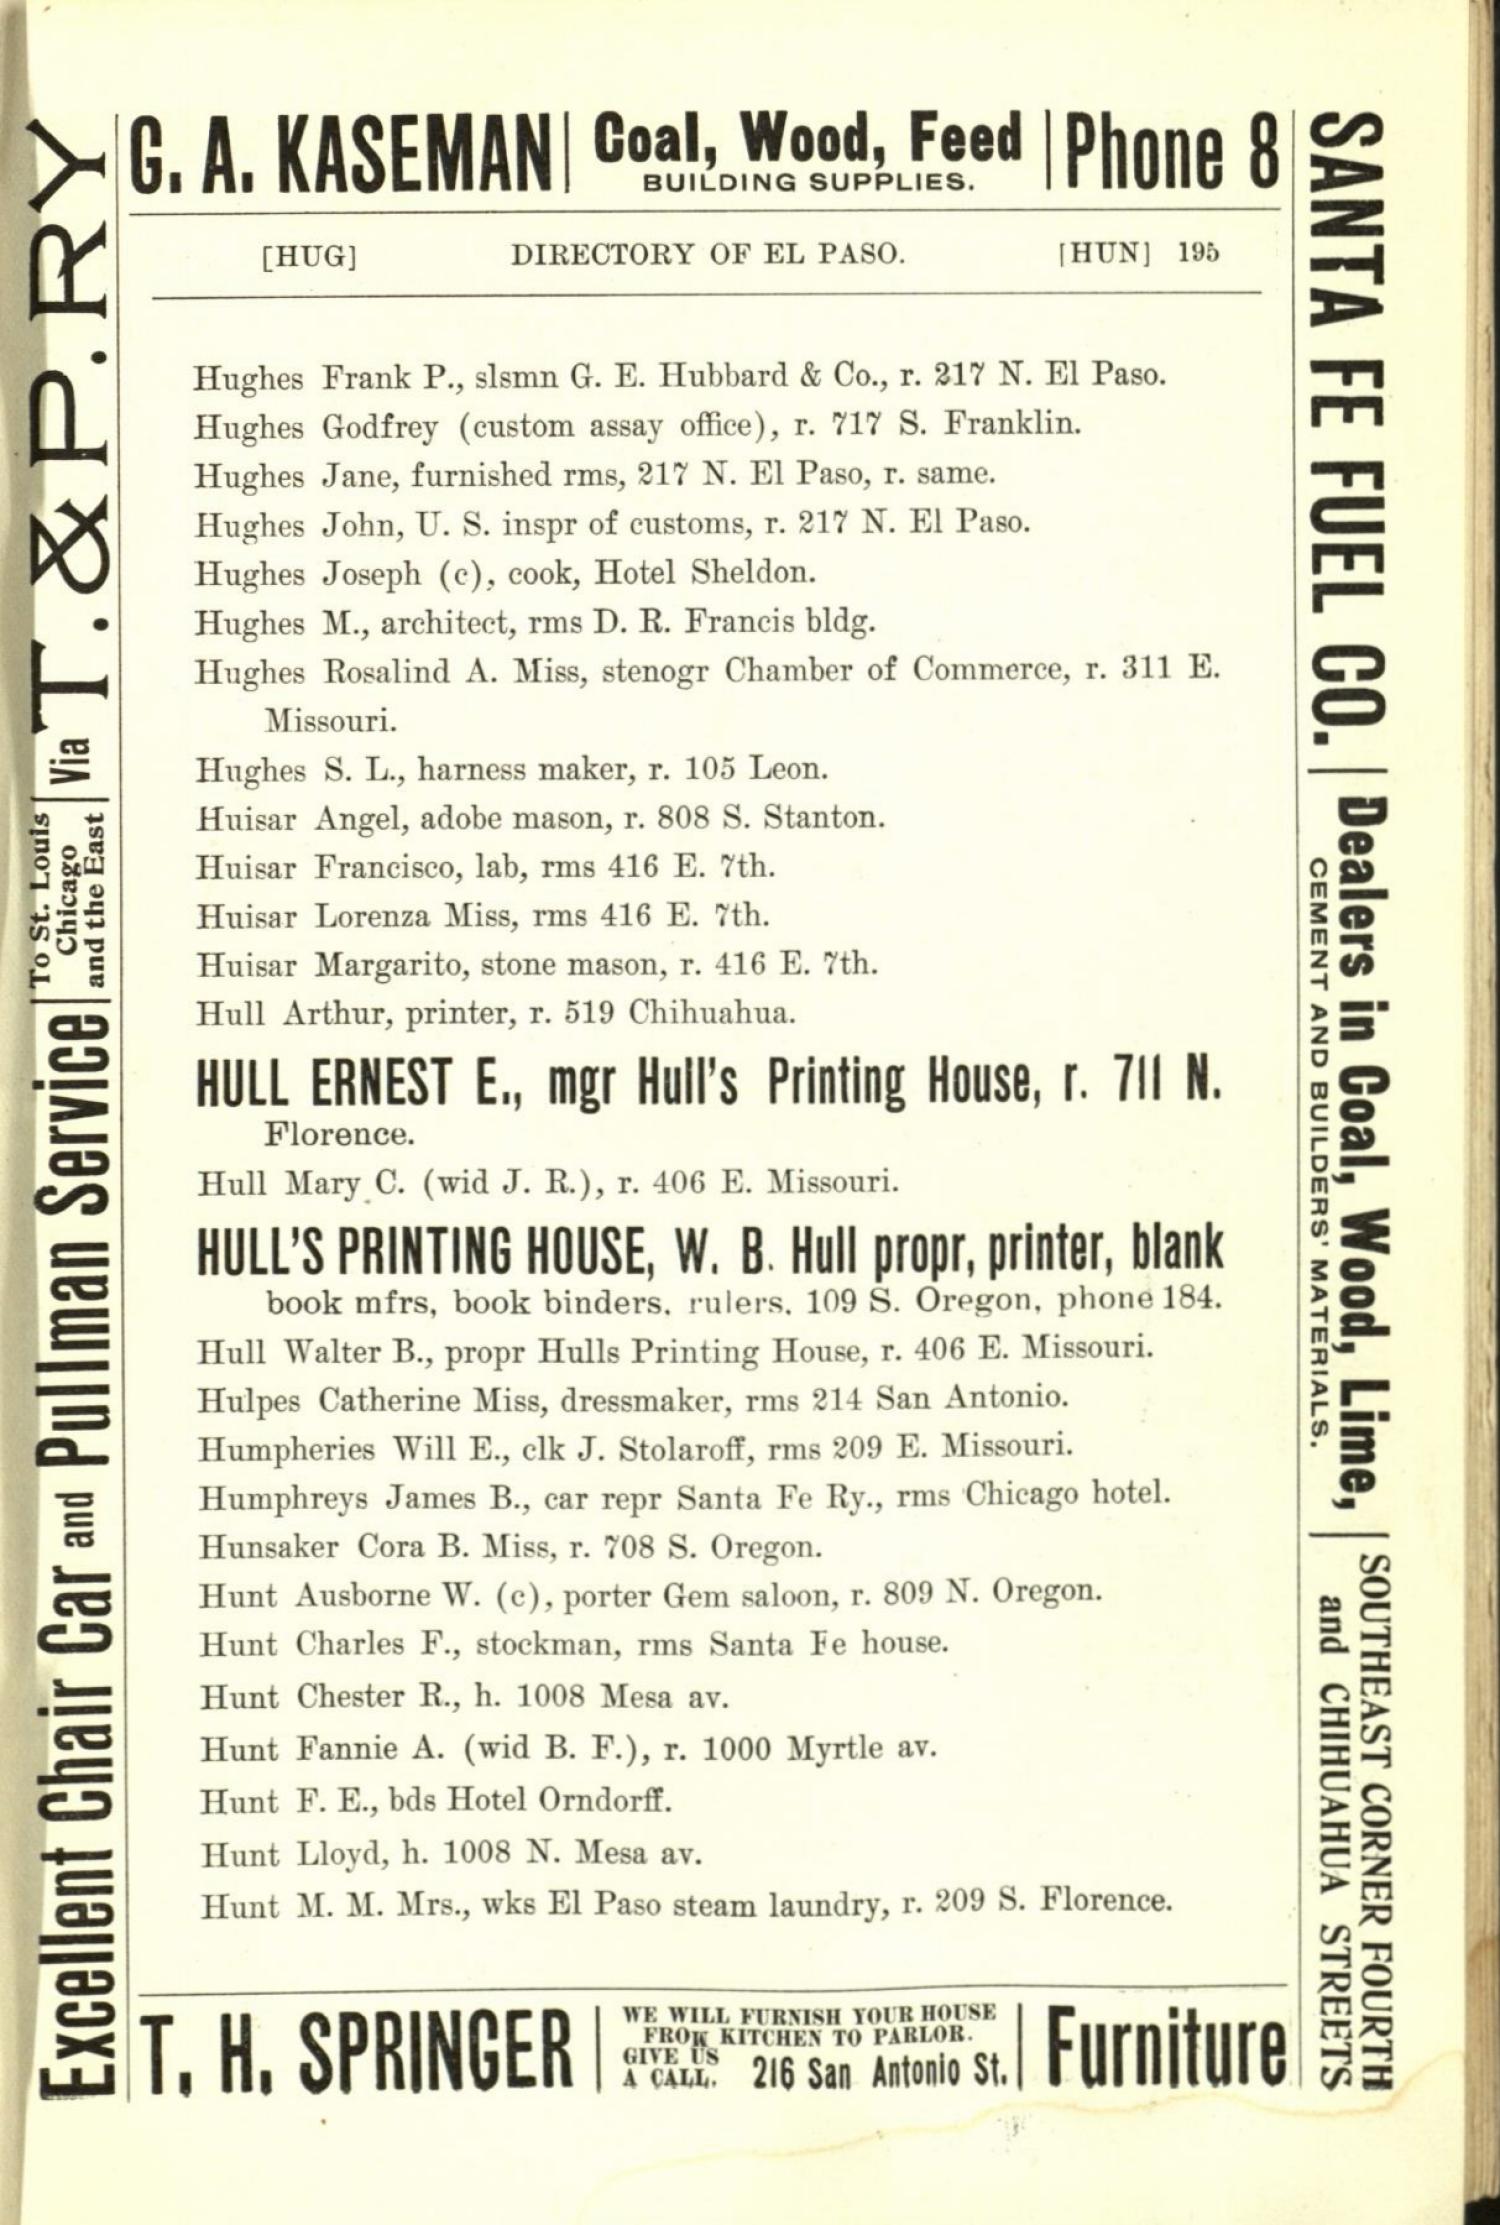 Worley's Directory of the City of El Paso, Texas 1901
                                                
                                                    195
                                                